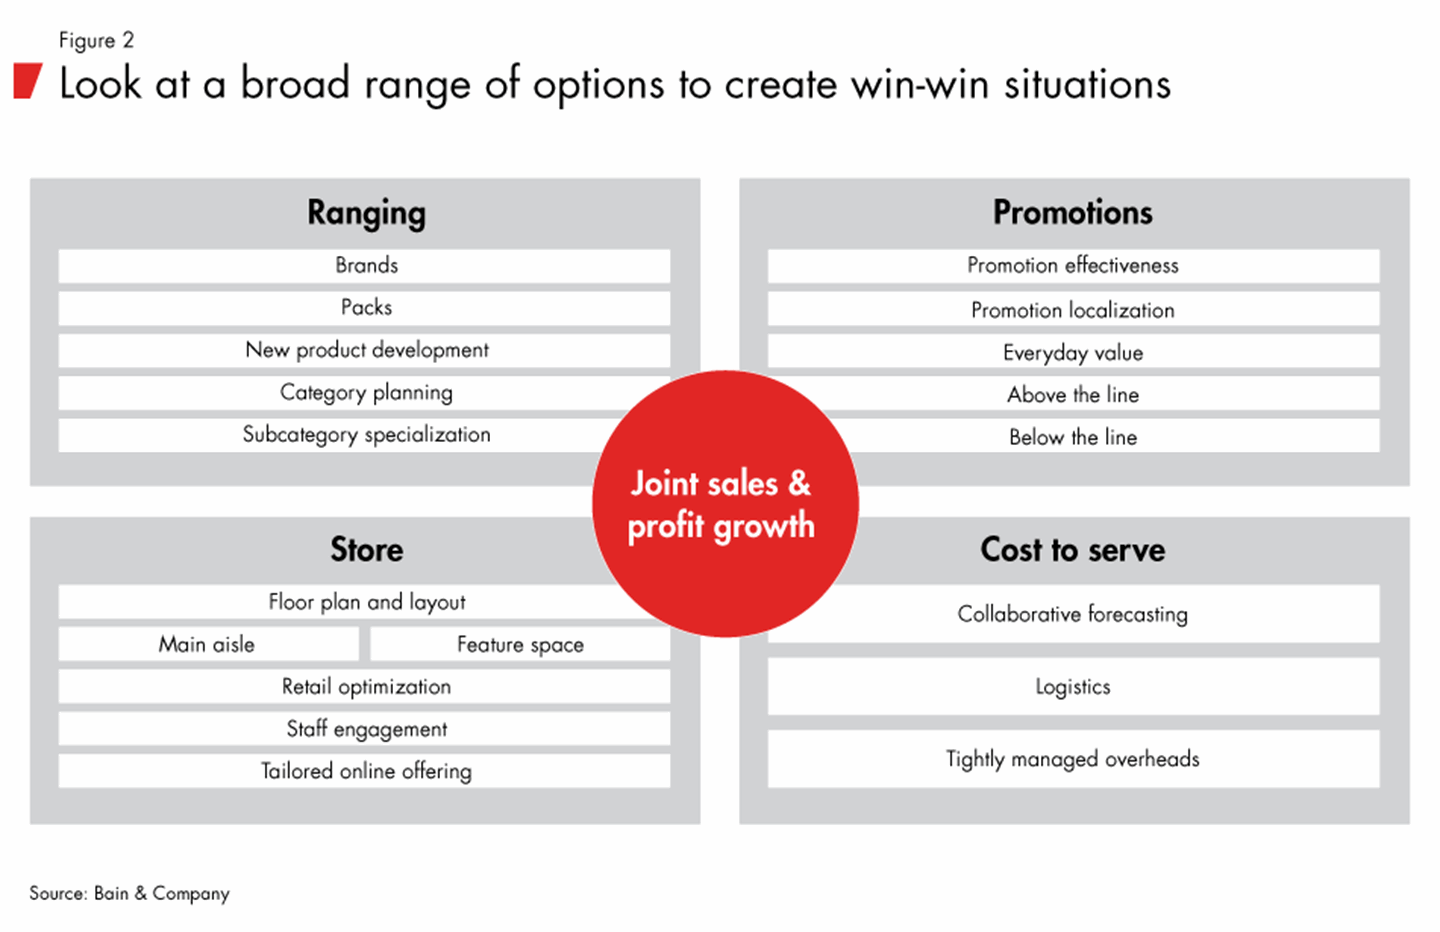 Look at a broad range of options to create win-win situations